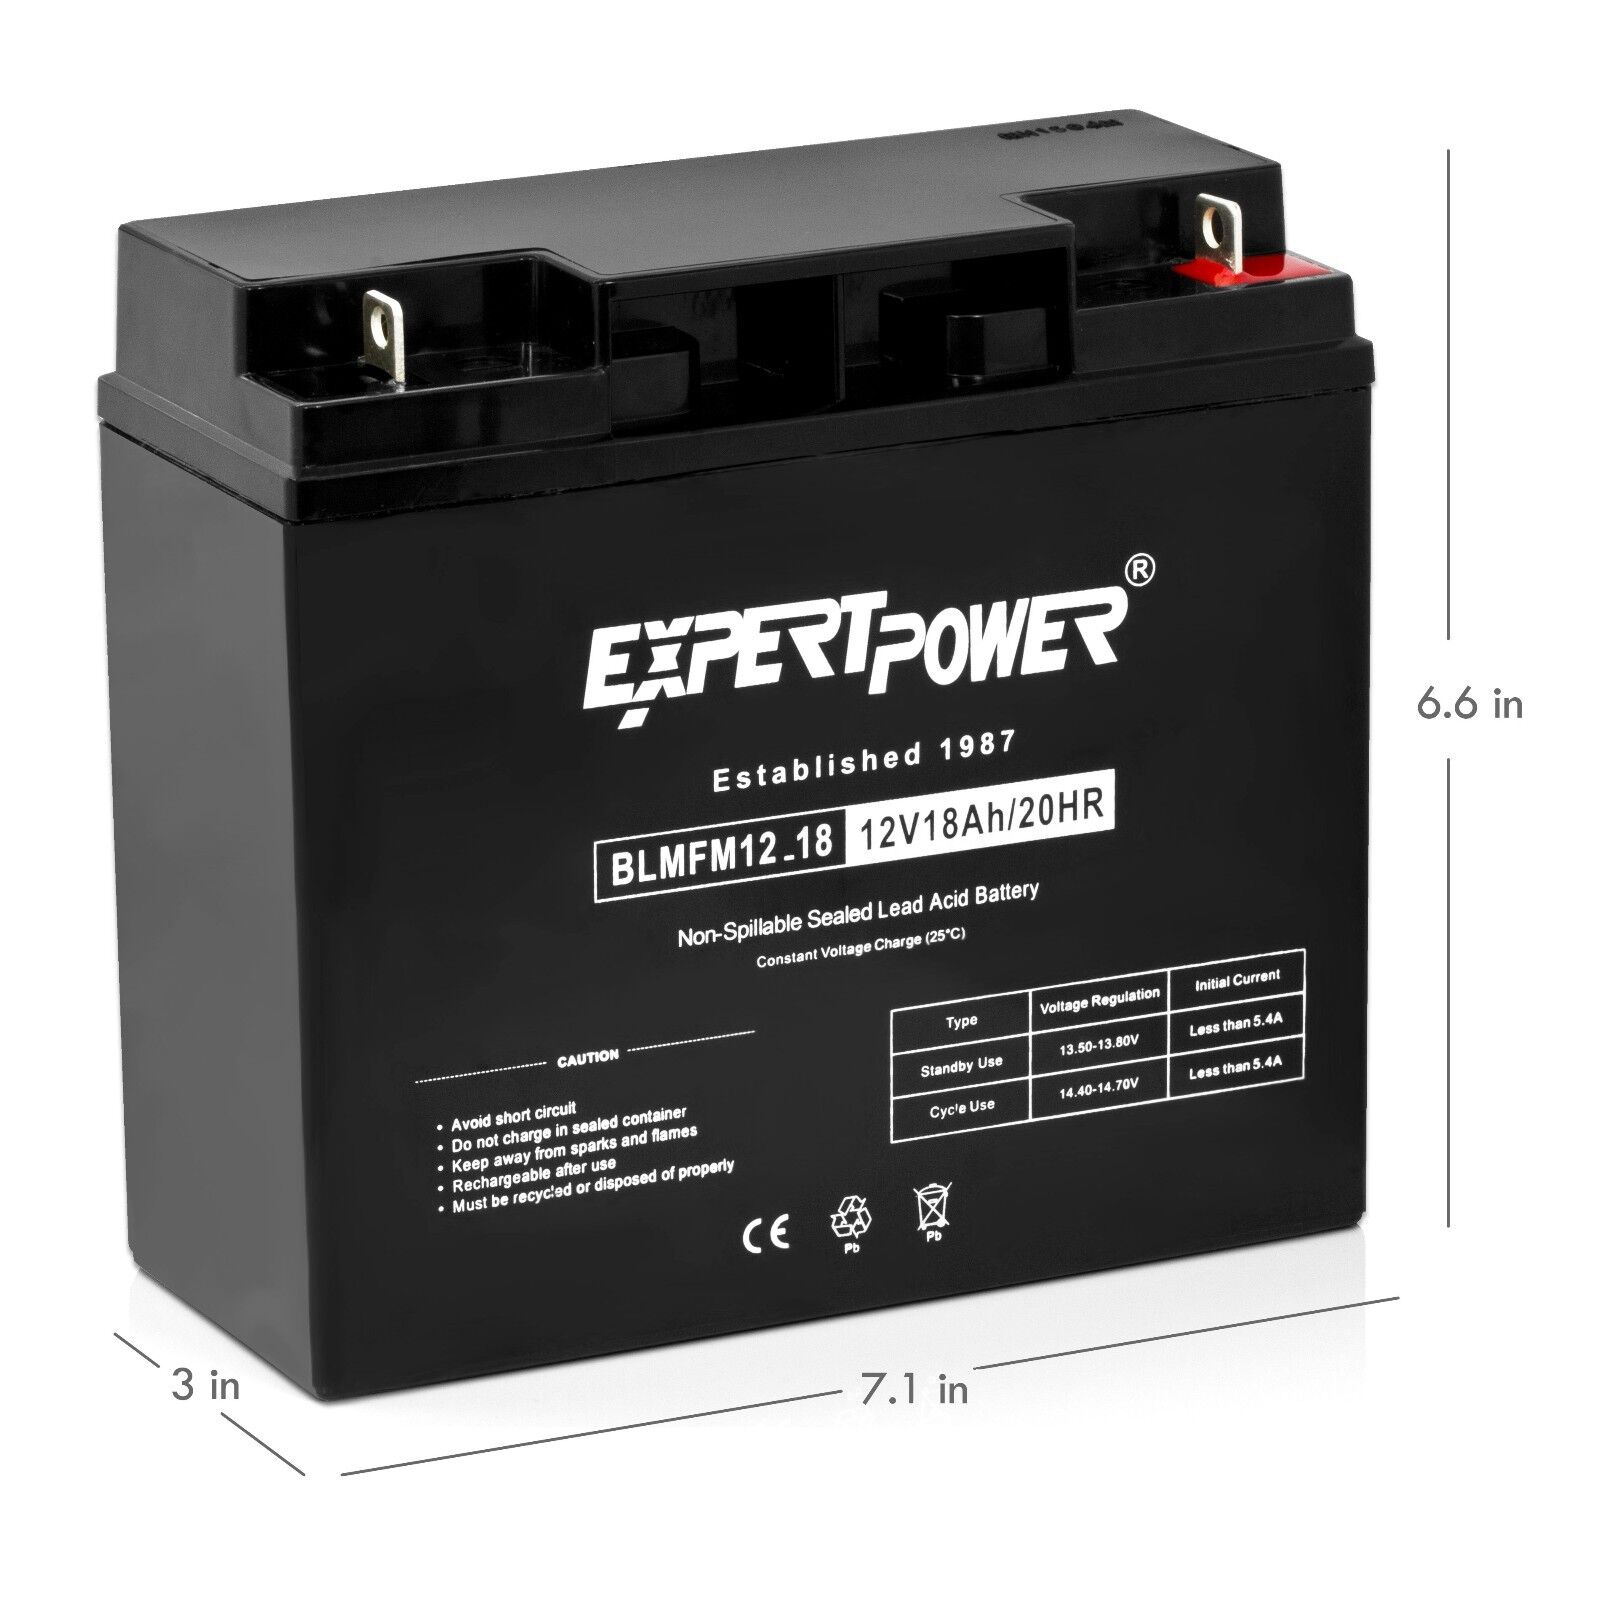 2 EXP12180 12V 18AH Battery for APC SmartUps 1400 1500 [Replacement for UB12180] ExpertPower EXP12180 - фотография #5